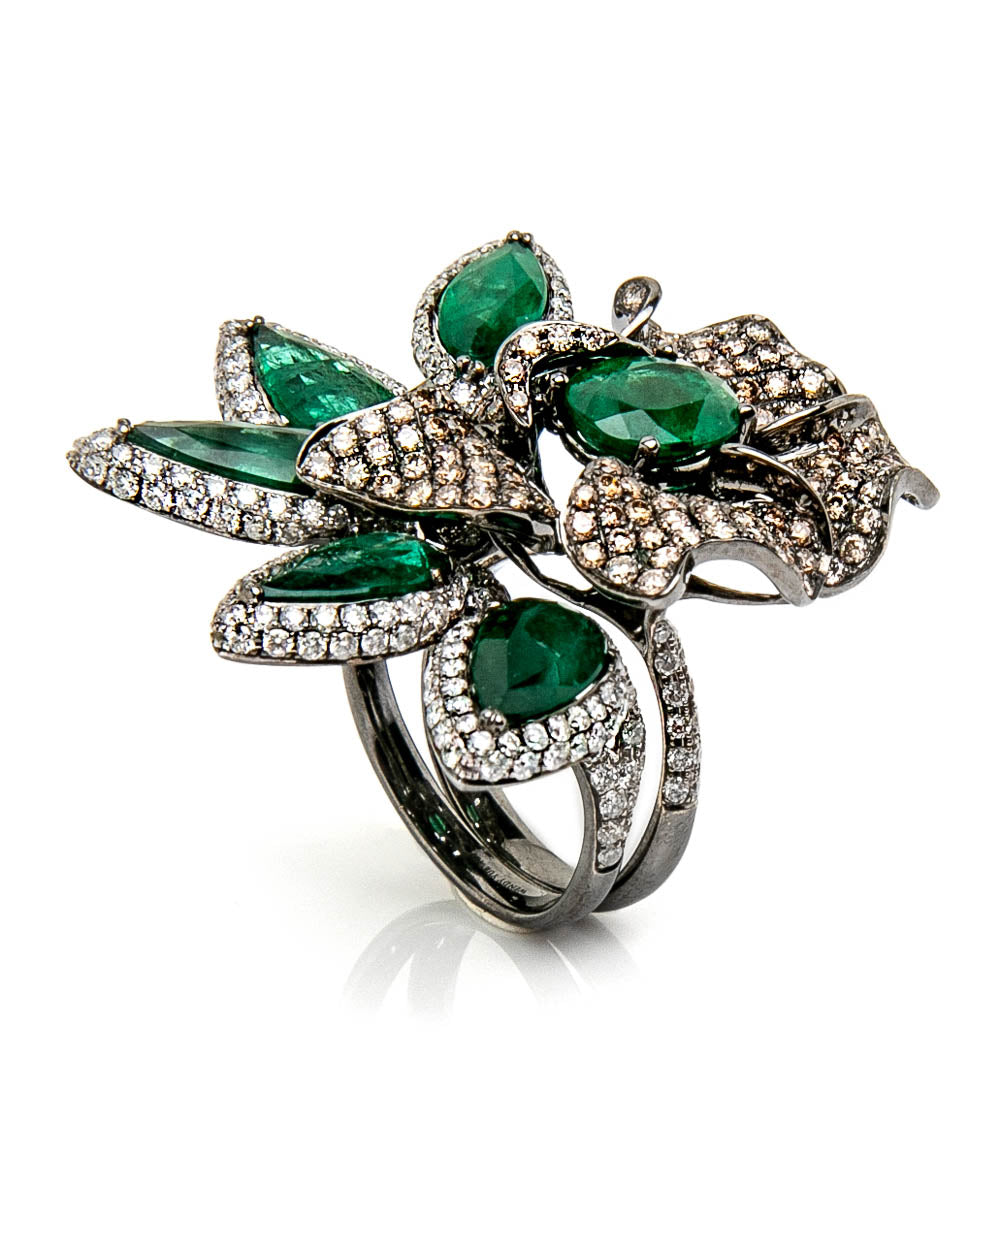 Emerald and Diamond Double Ring